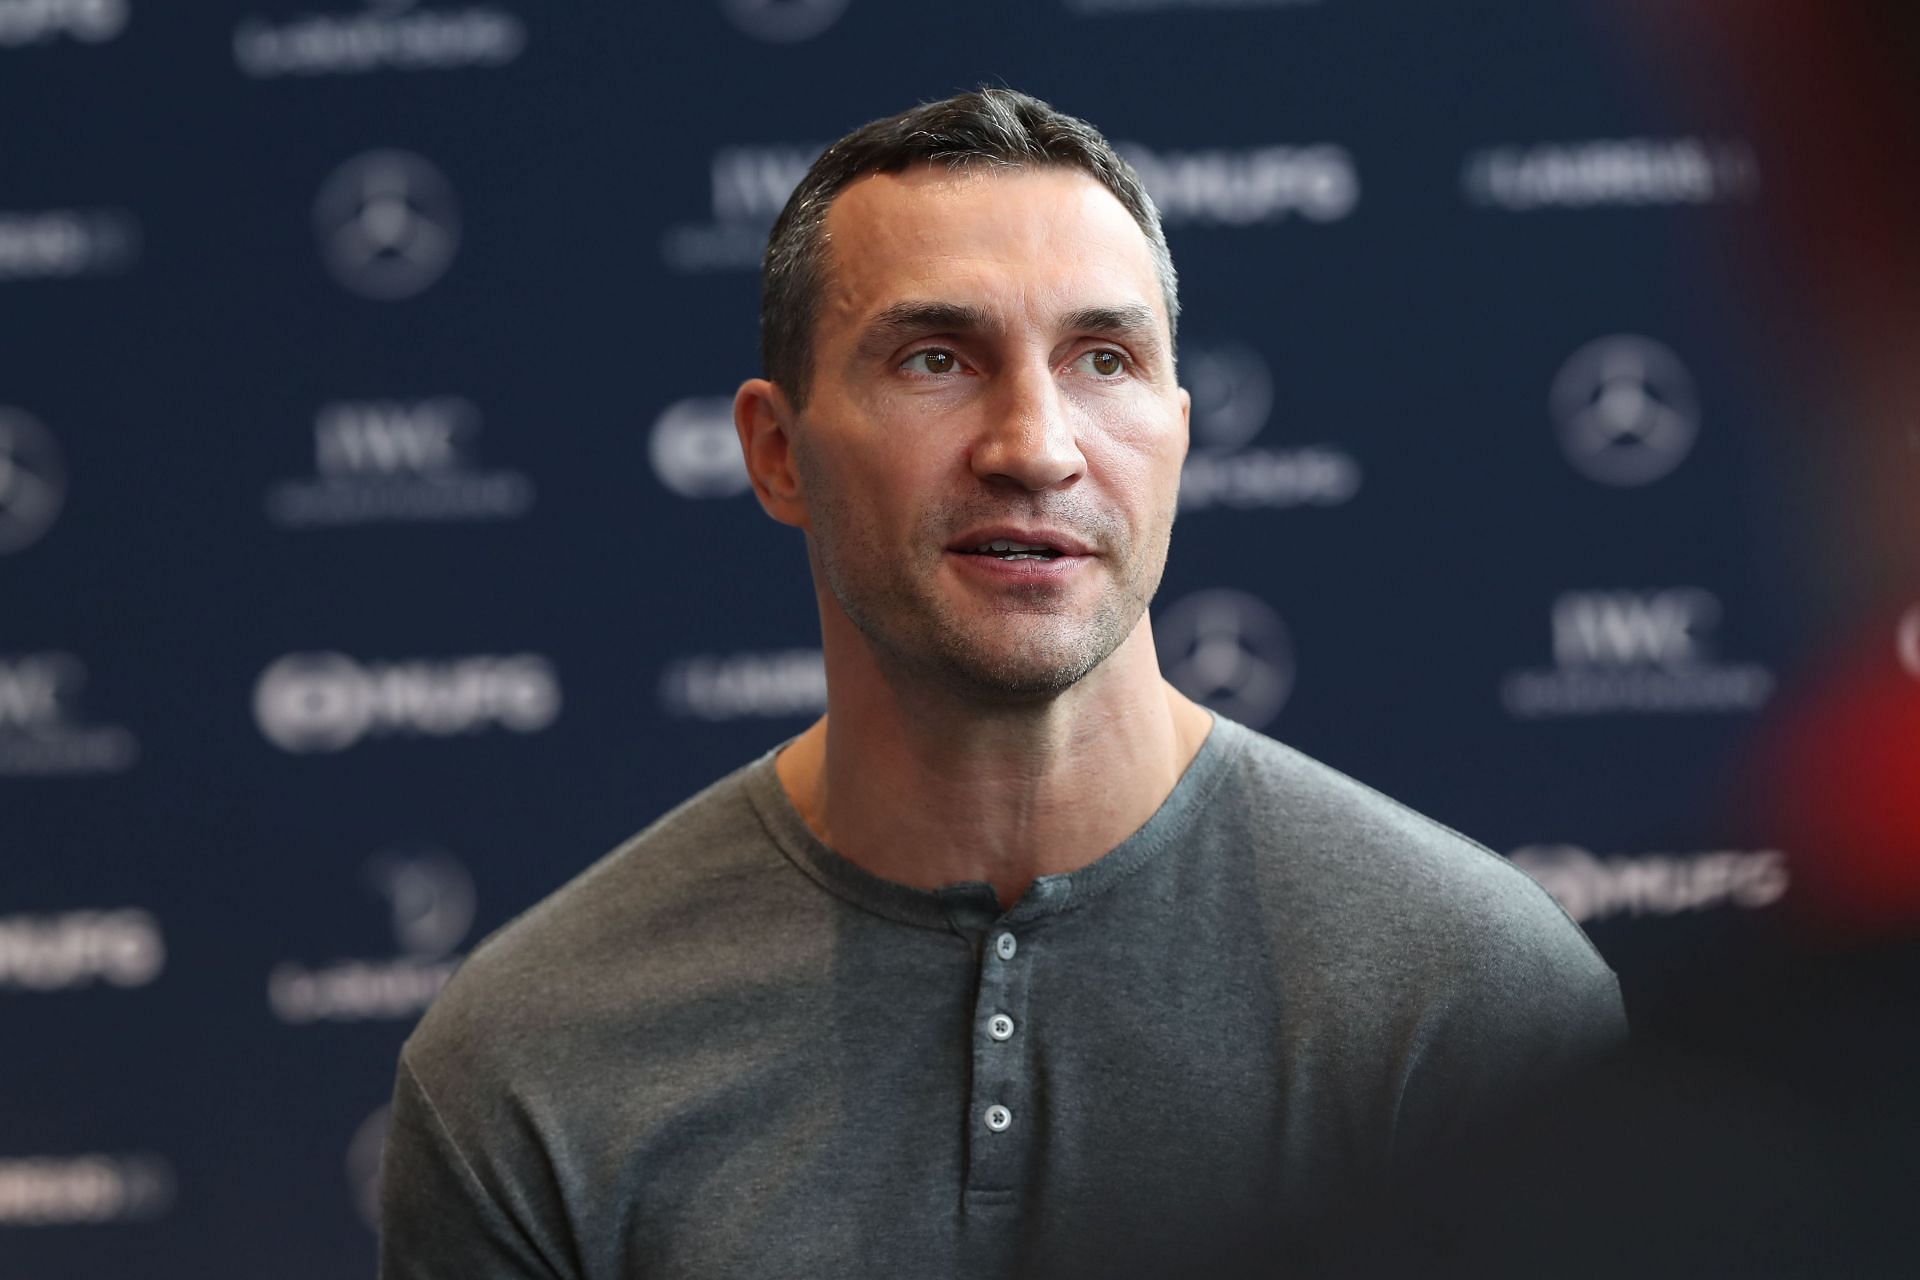 Wladimir Klitschko believes people are waking up to Russian aggression in Ukraine.